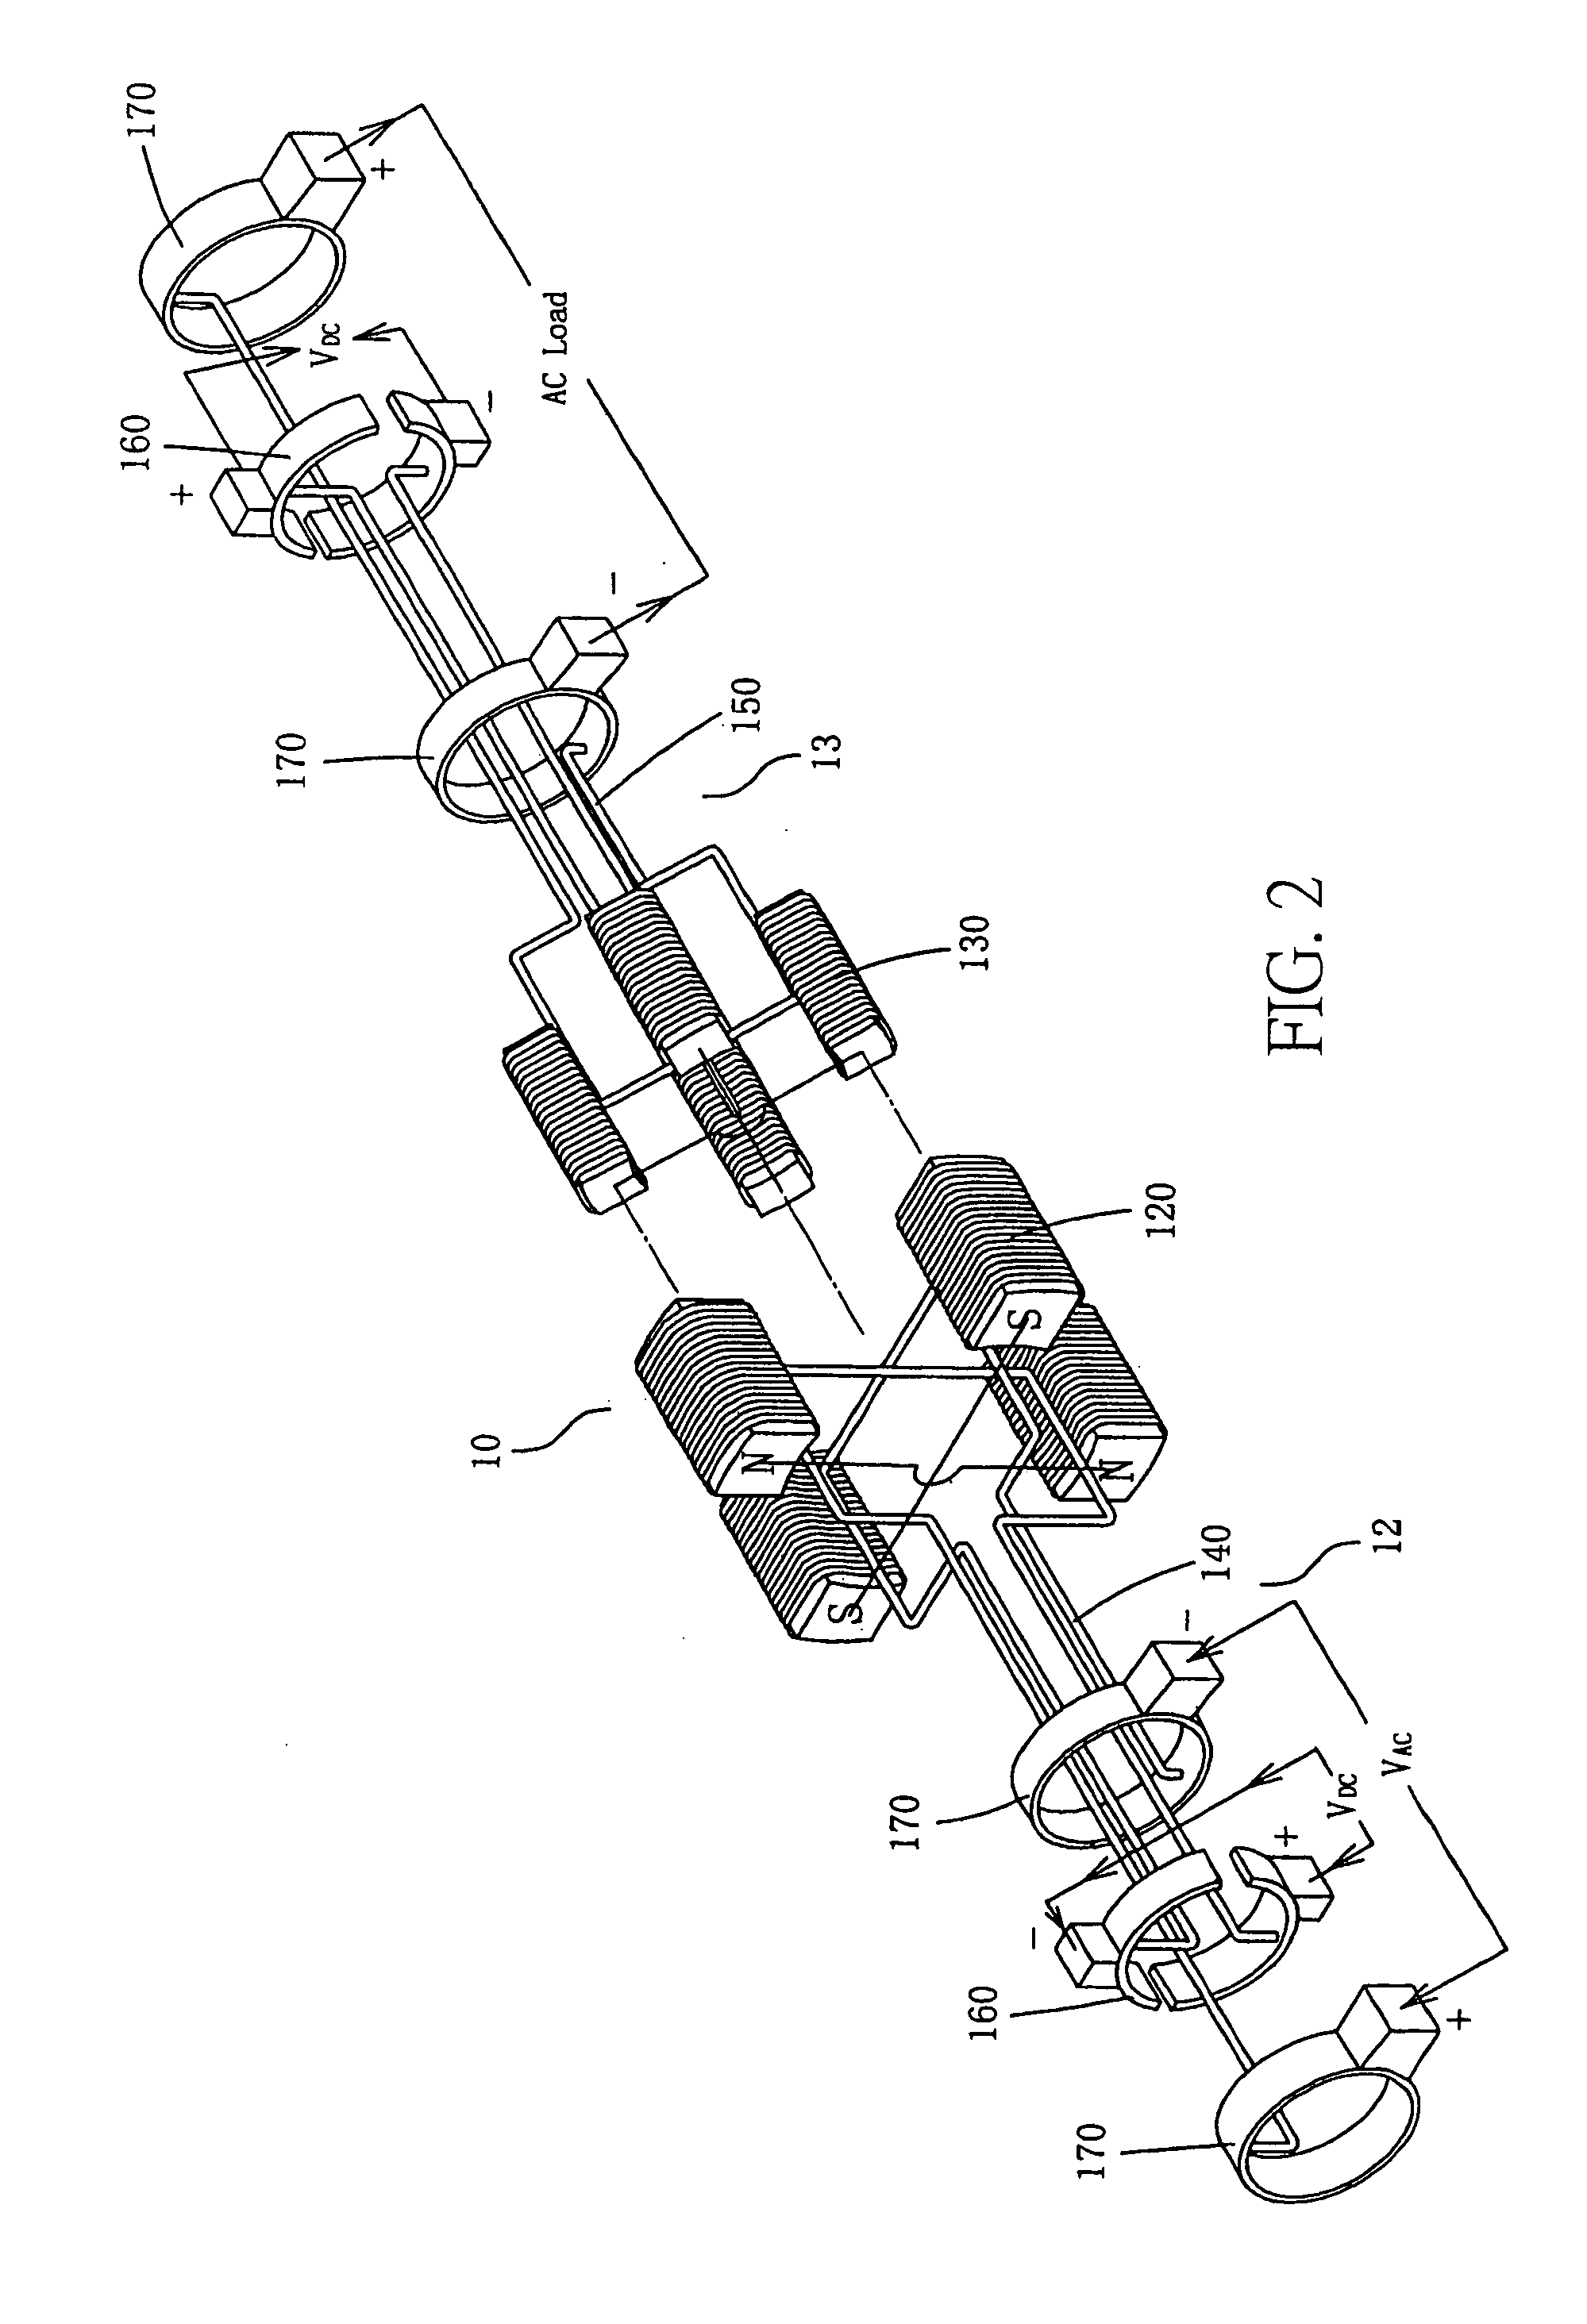 Self-contained intelligent cascaded synchronous electric motor-generator tandems of cumulative compound excitation